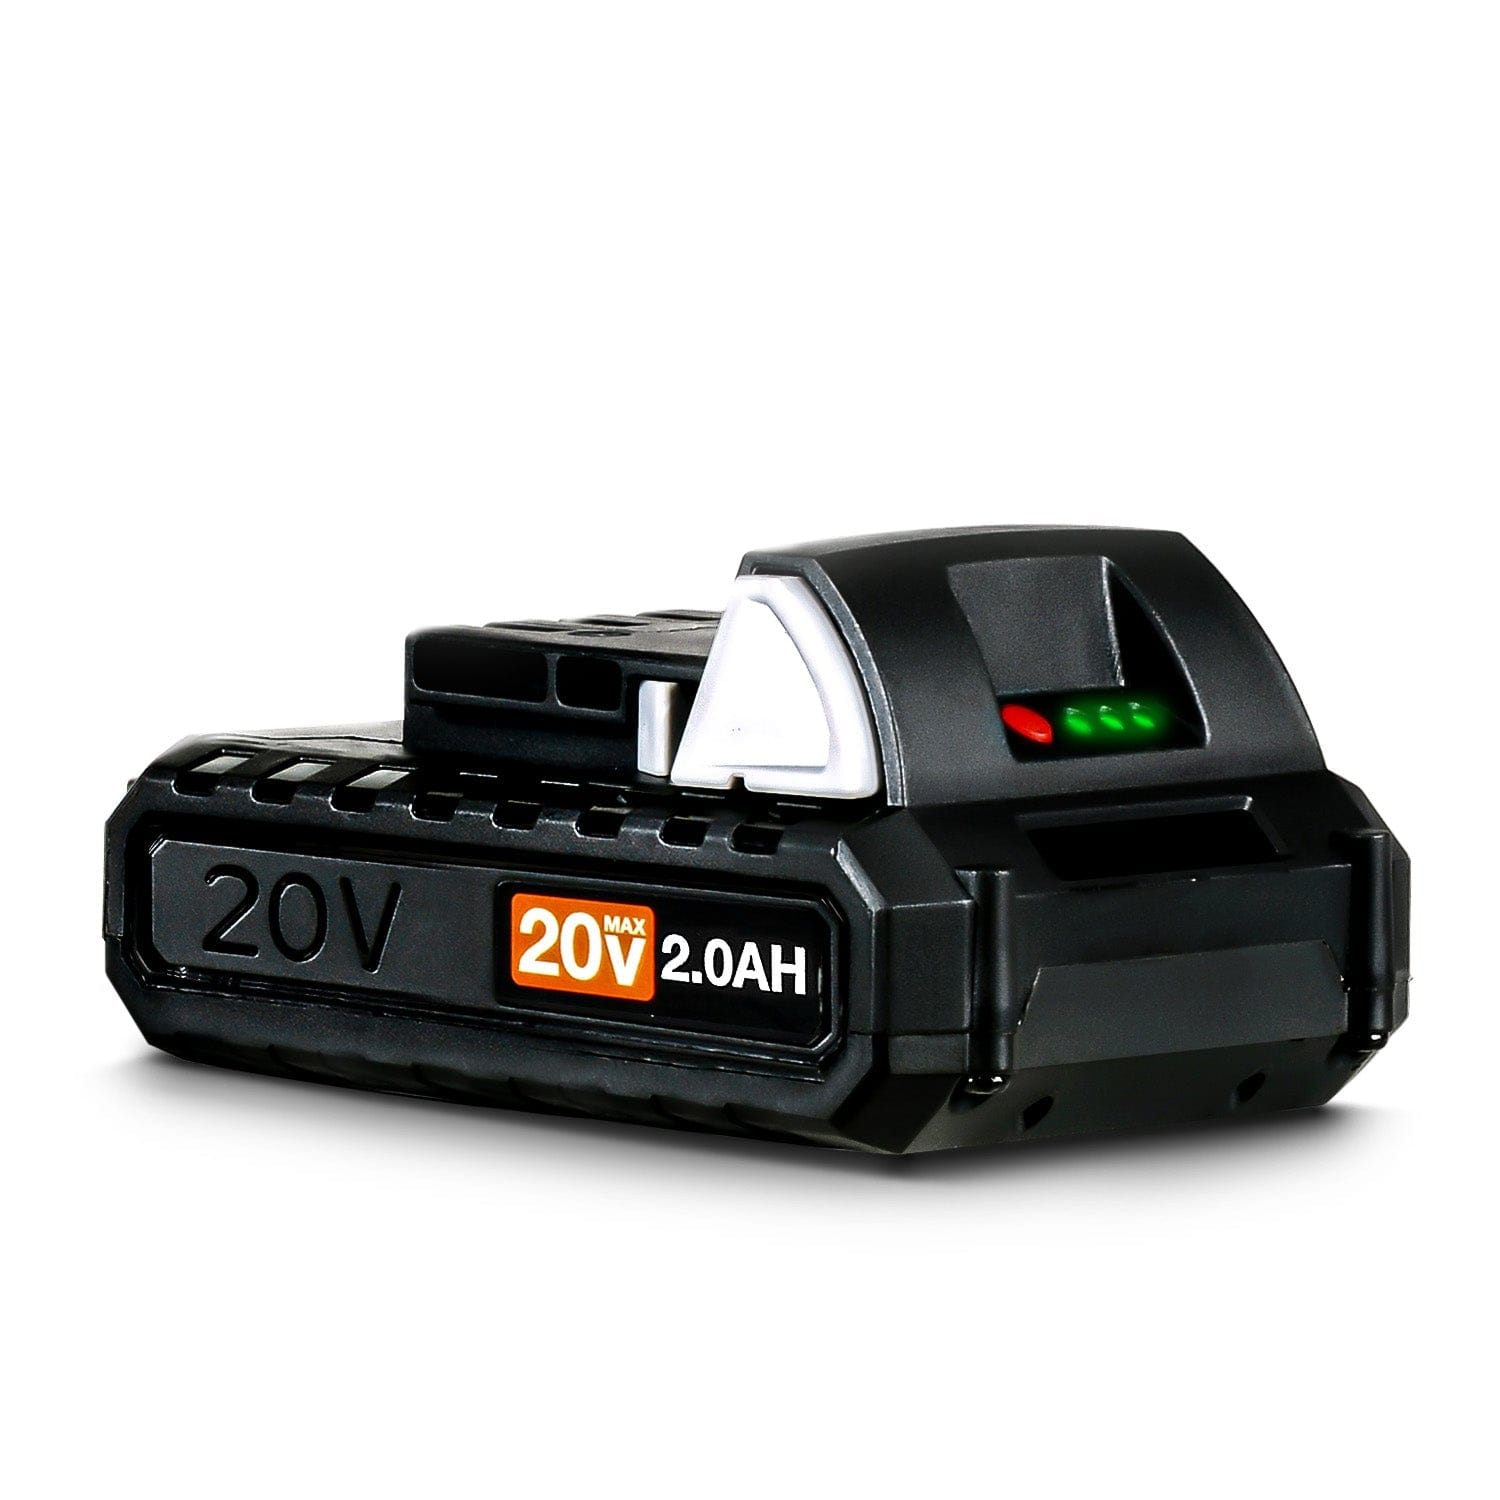 SuperHandy 20V 2Ah Lithium Ion Battery - For 20V Battery Systems